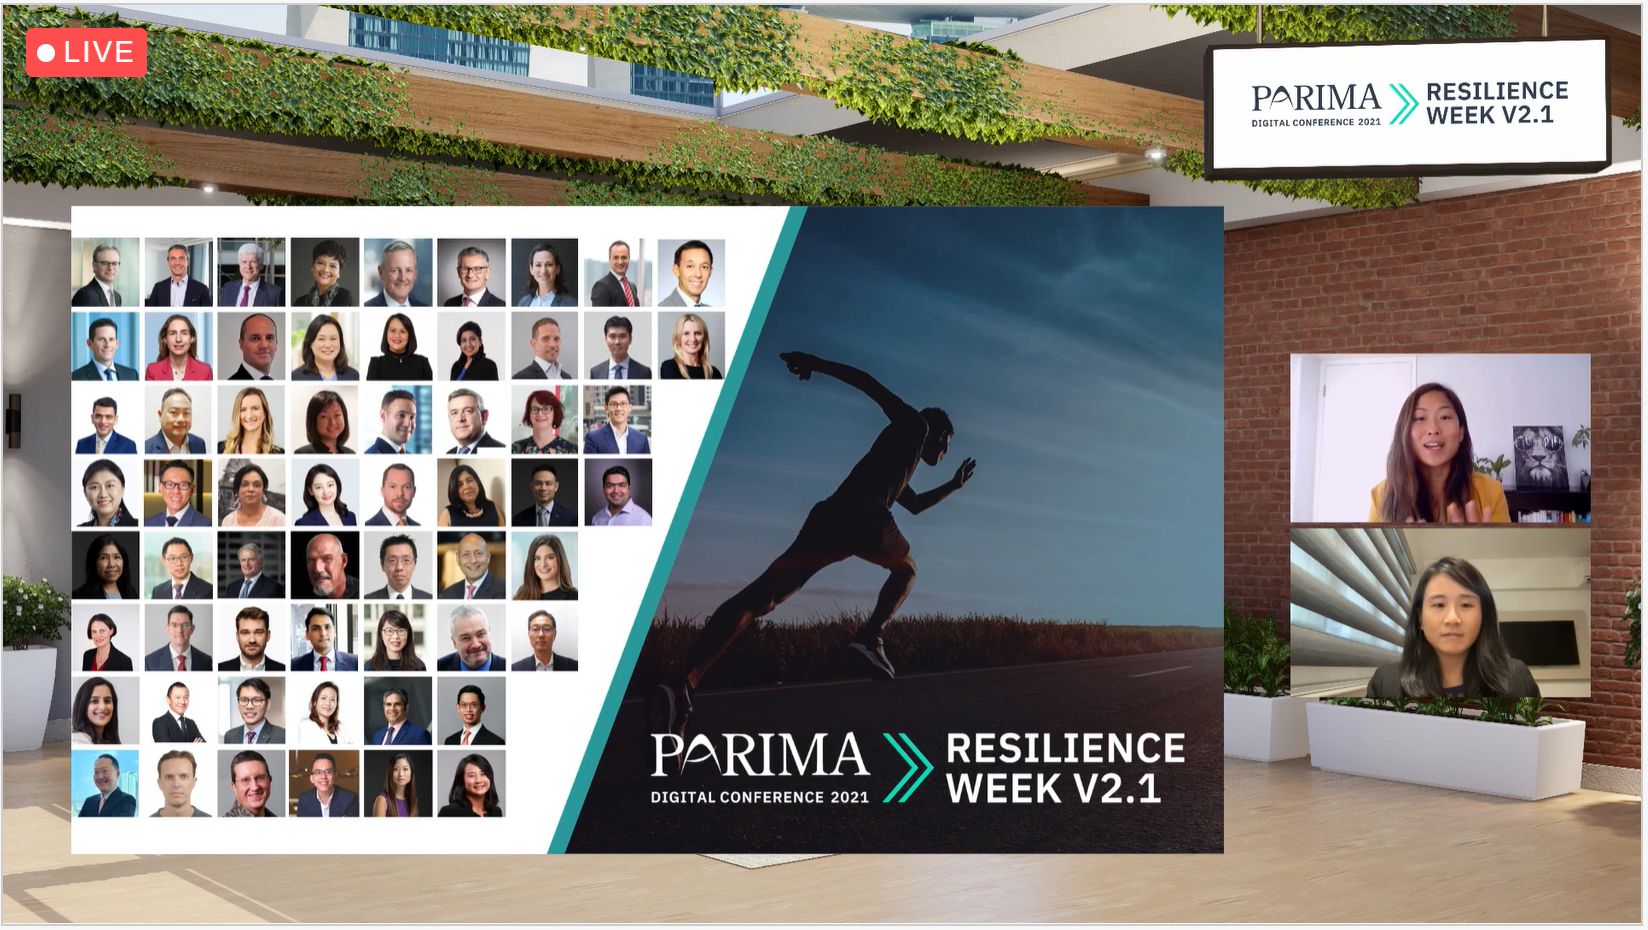 PARIMA’s digital conference on resilience gets underway